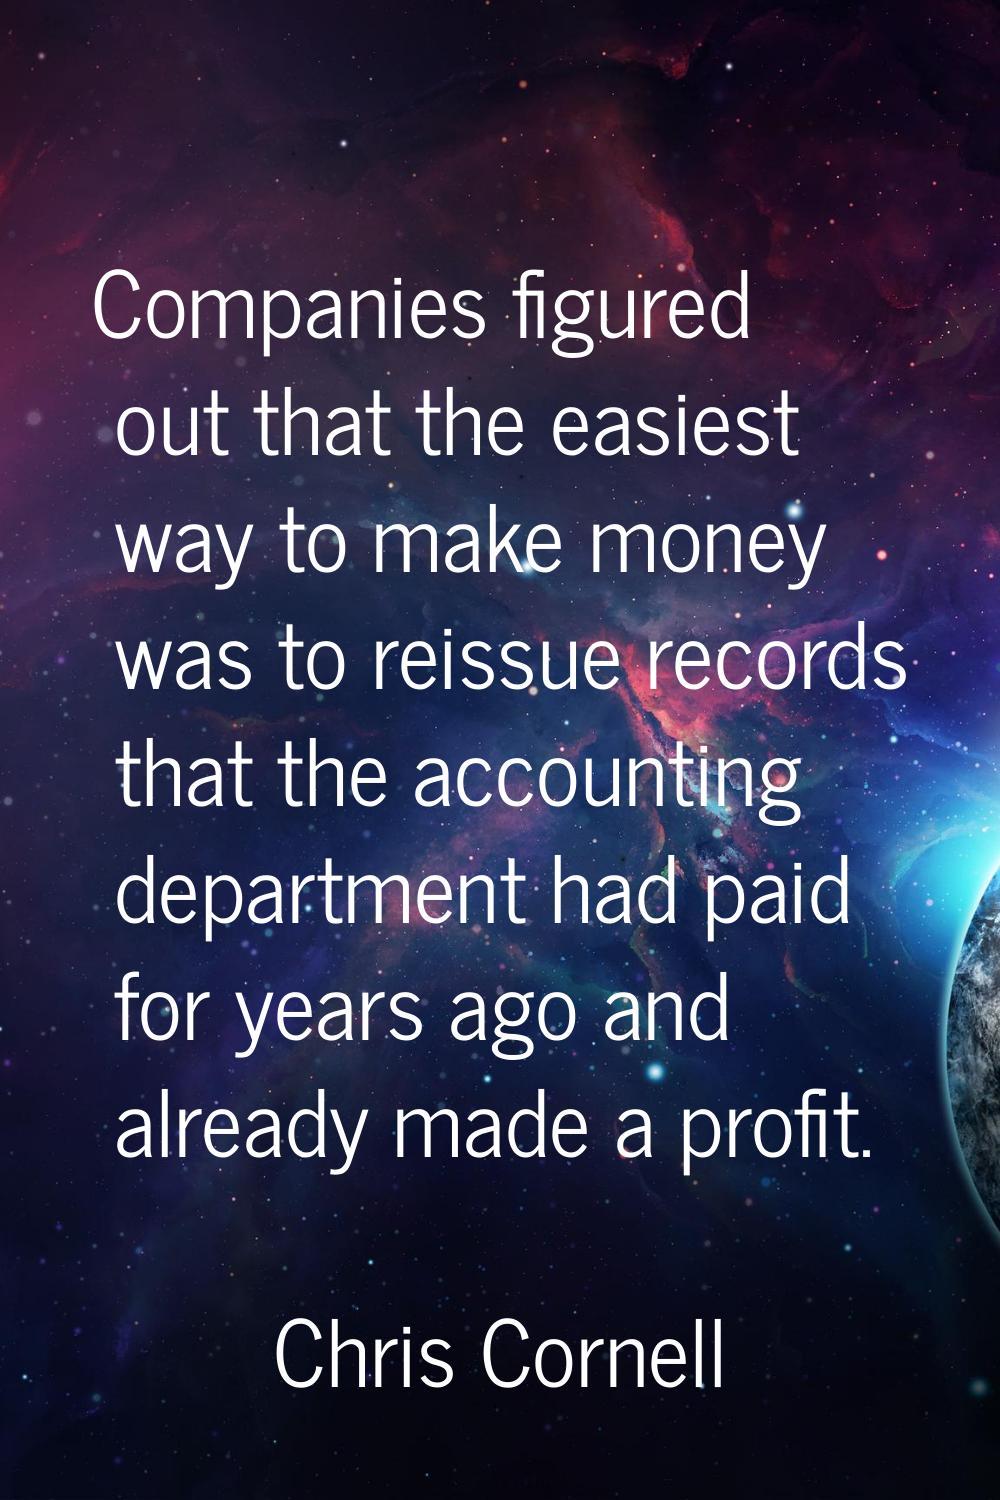 Companies figured out that the easiest way to make money was to reissue records that the accounting